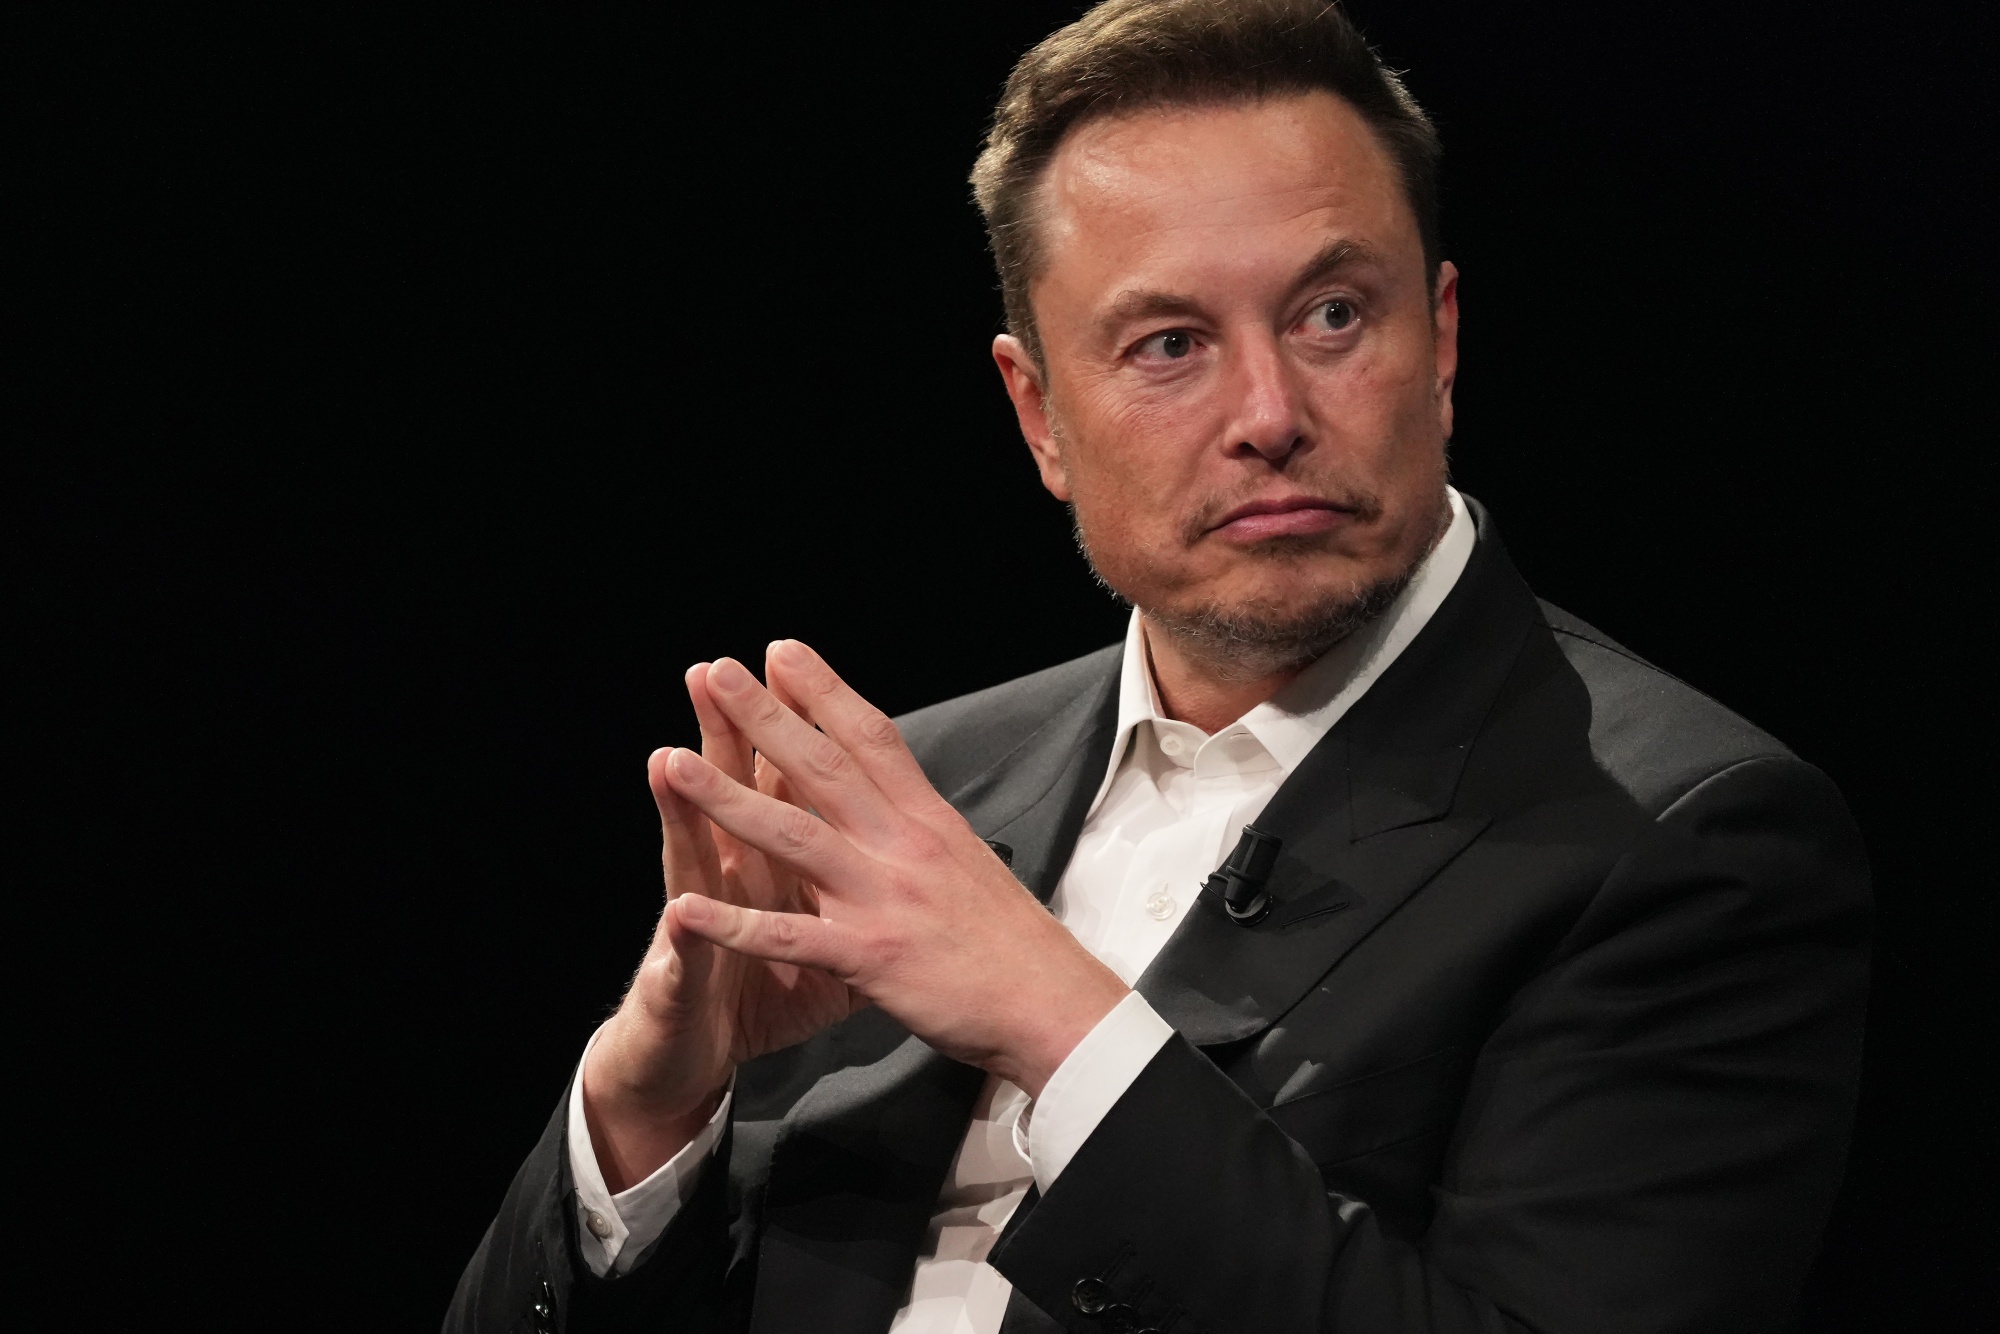 New Data: Twitter/X's Ad Rates Have Plunged 75% in the Elon Musk Era